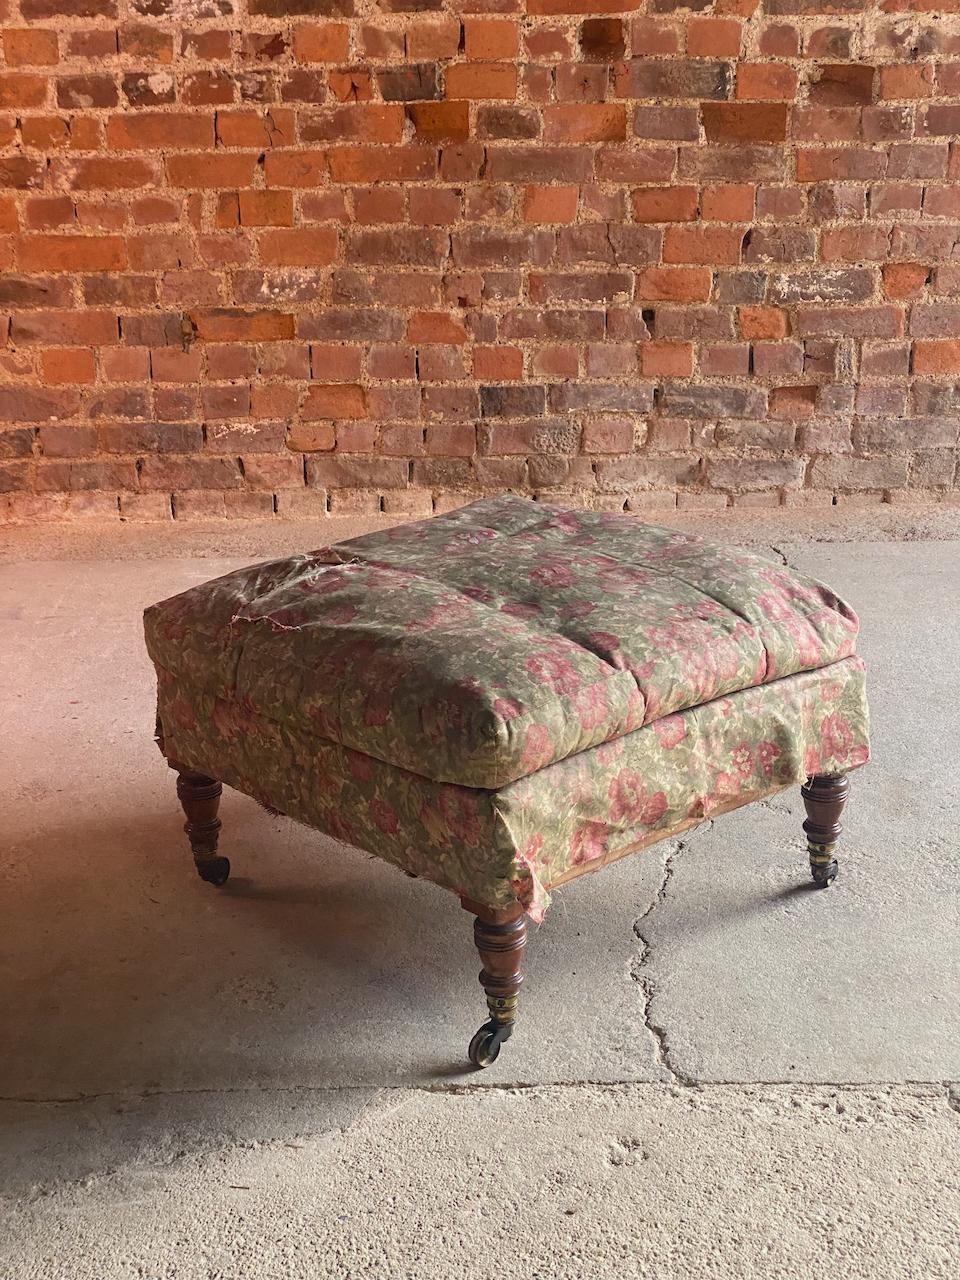 Antique Howard & Sons footstool 19th Century England Circa 1860

A magnificent antique 19th century Howard & Sons Footstool England circa 1860, the square attached cushion down top and base covered in floral print fabric, raised on four turned